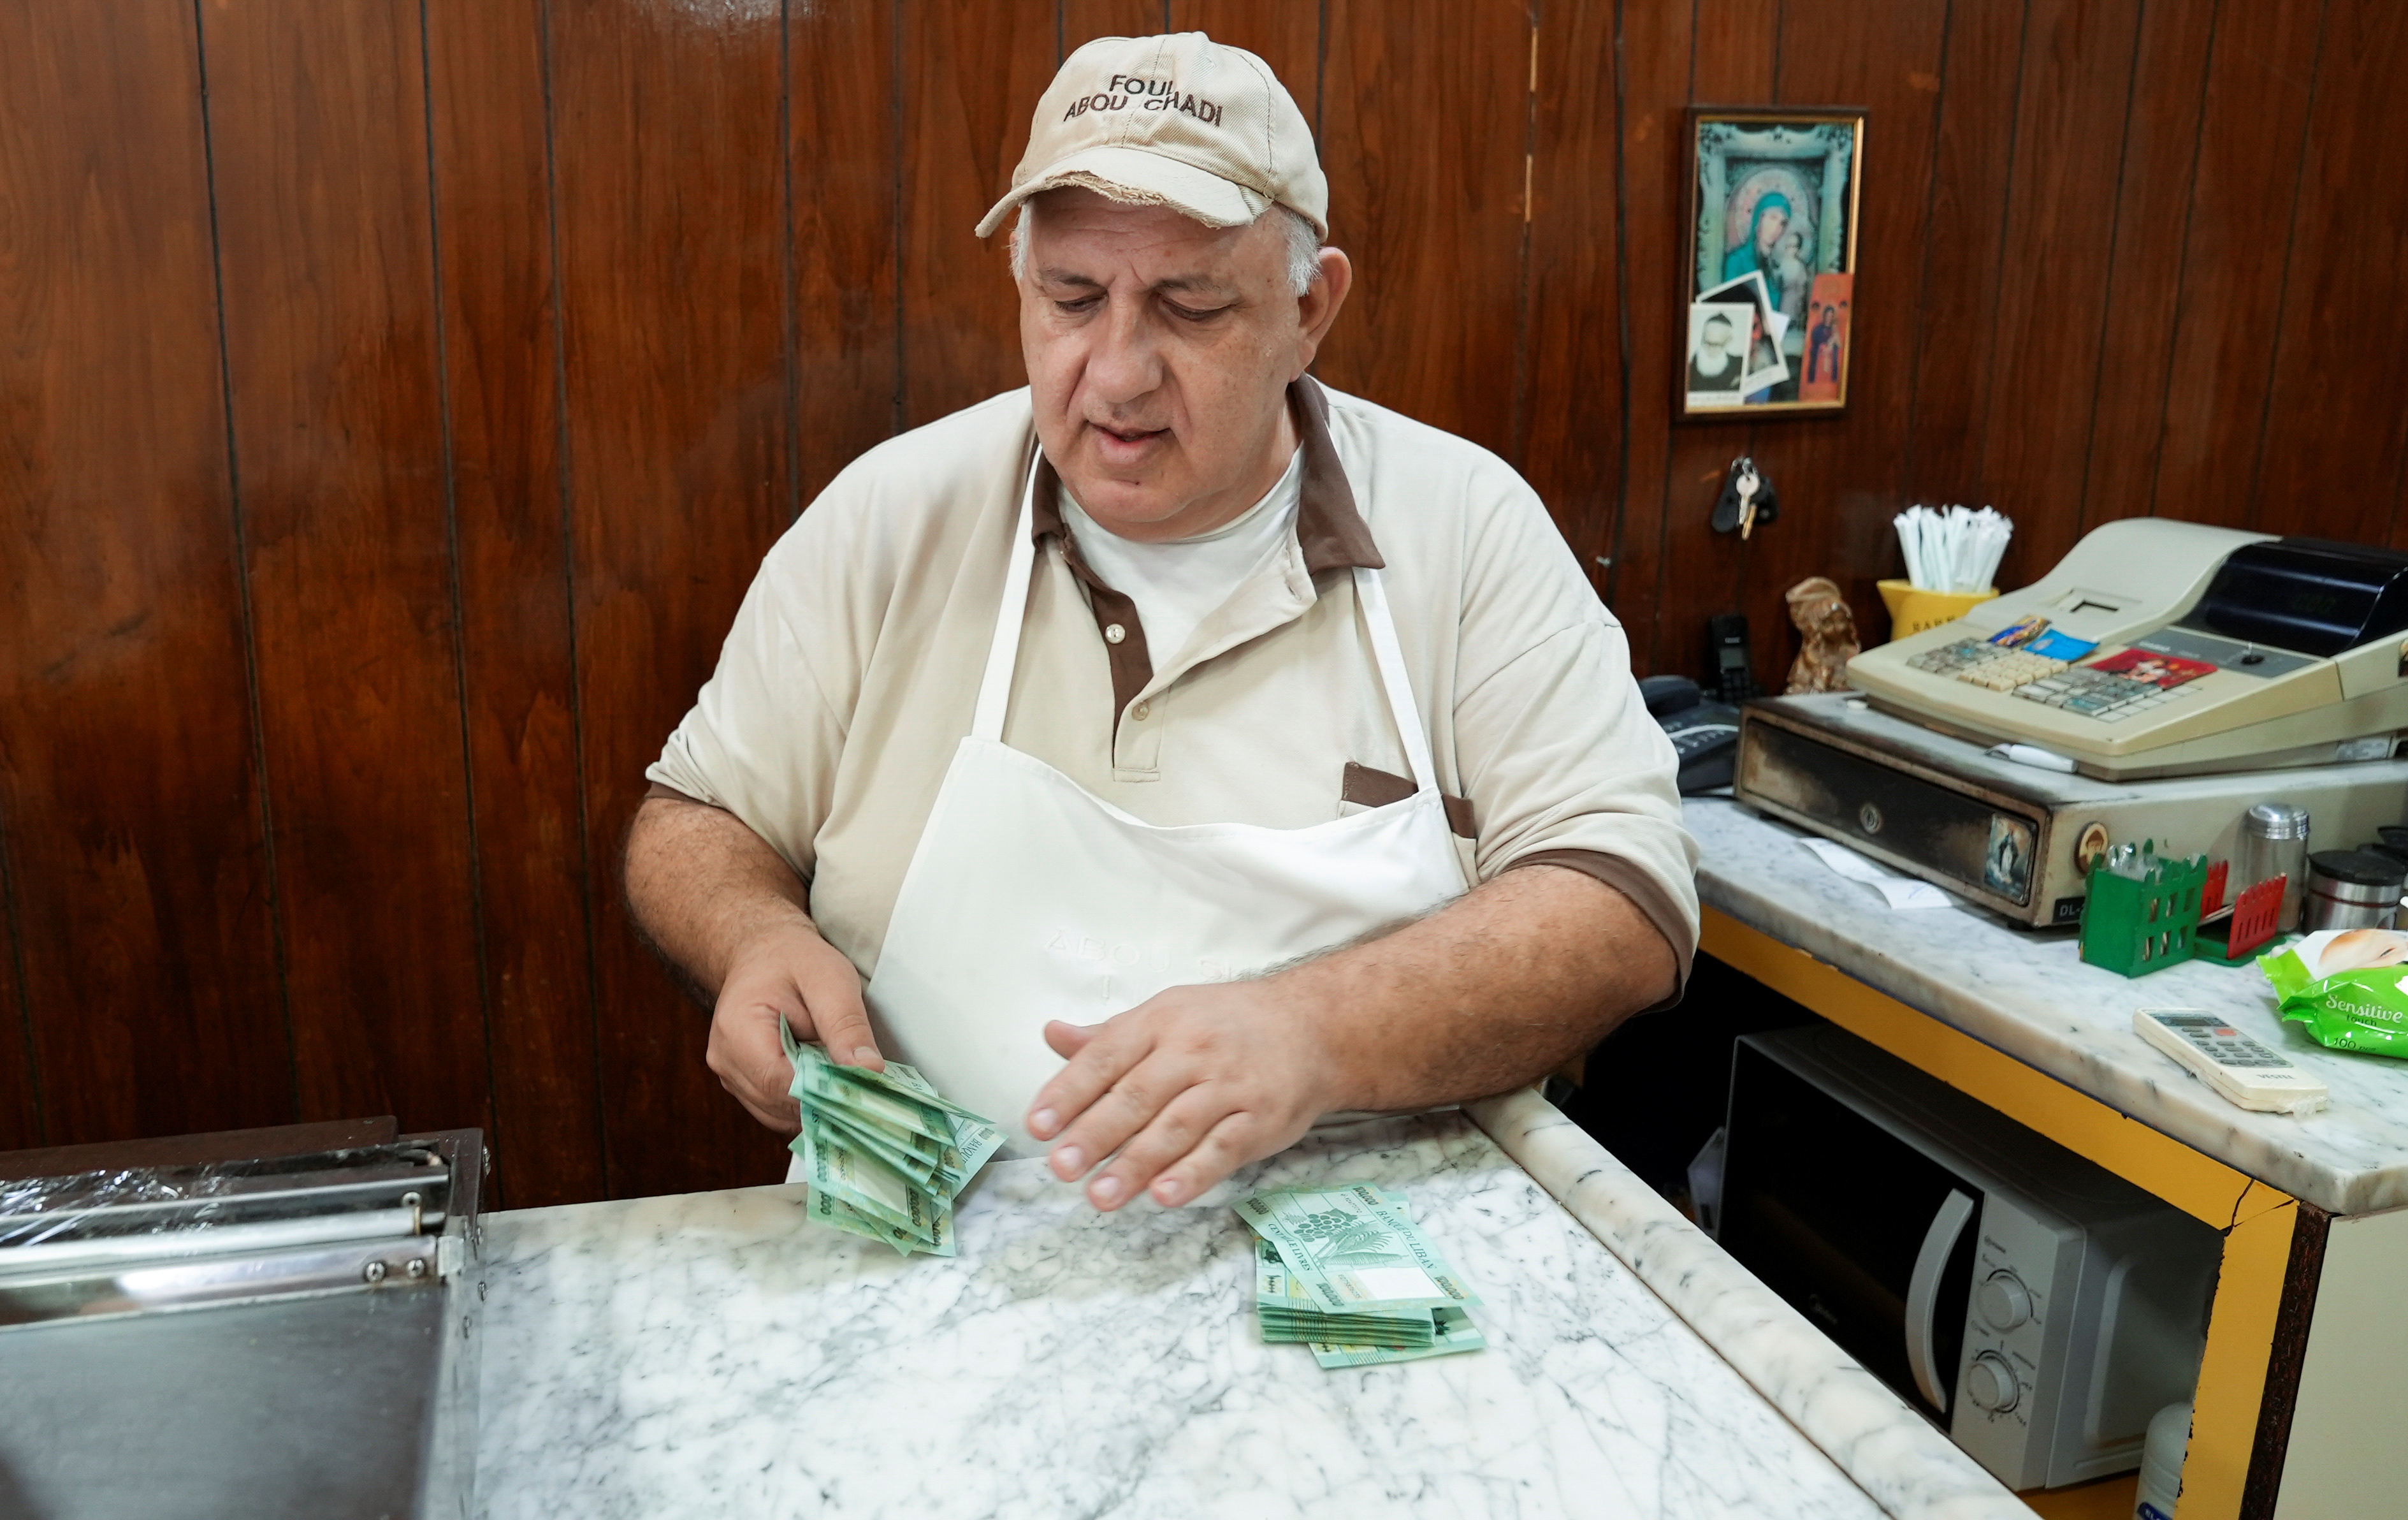 Antoine Haddad, known as Abou Chadi, a Lebanese restaurant owner, counts Lebanese pounds in Jal el-Dib